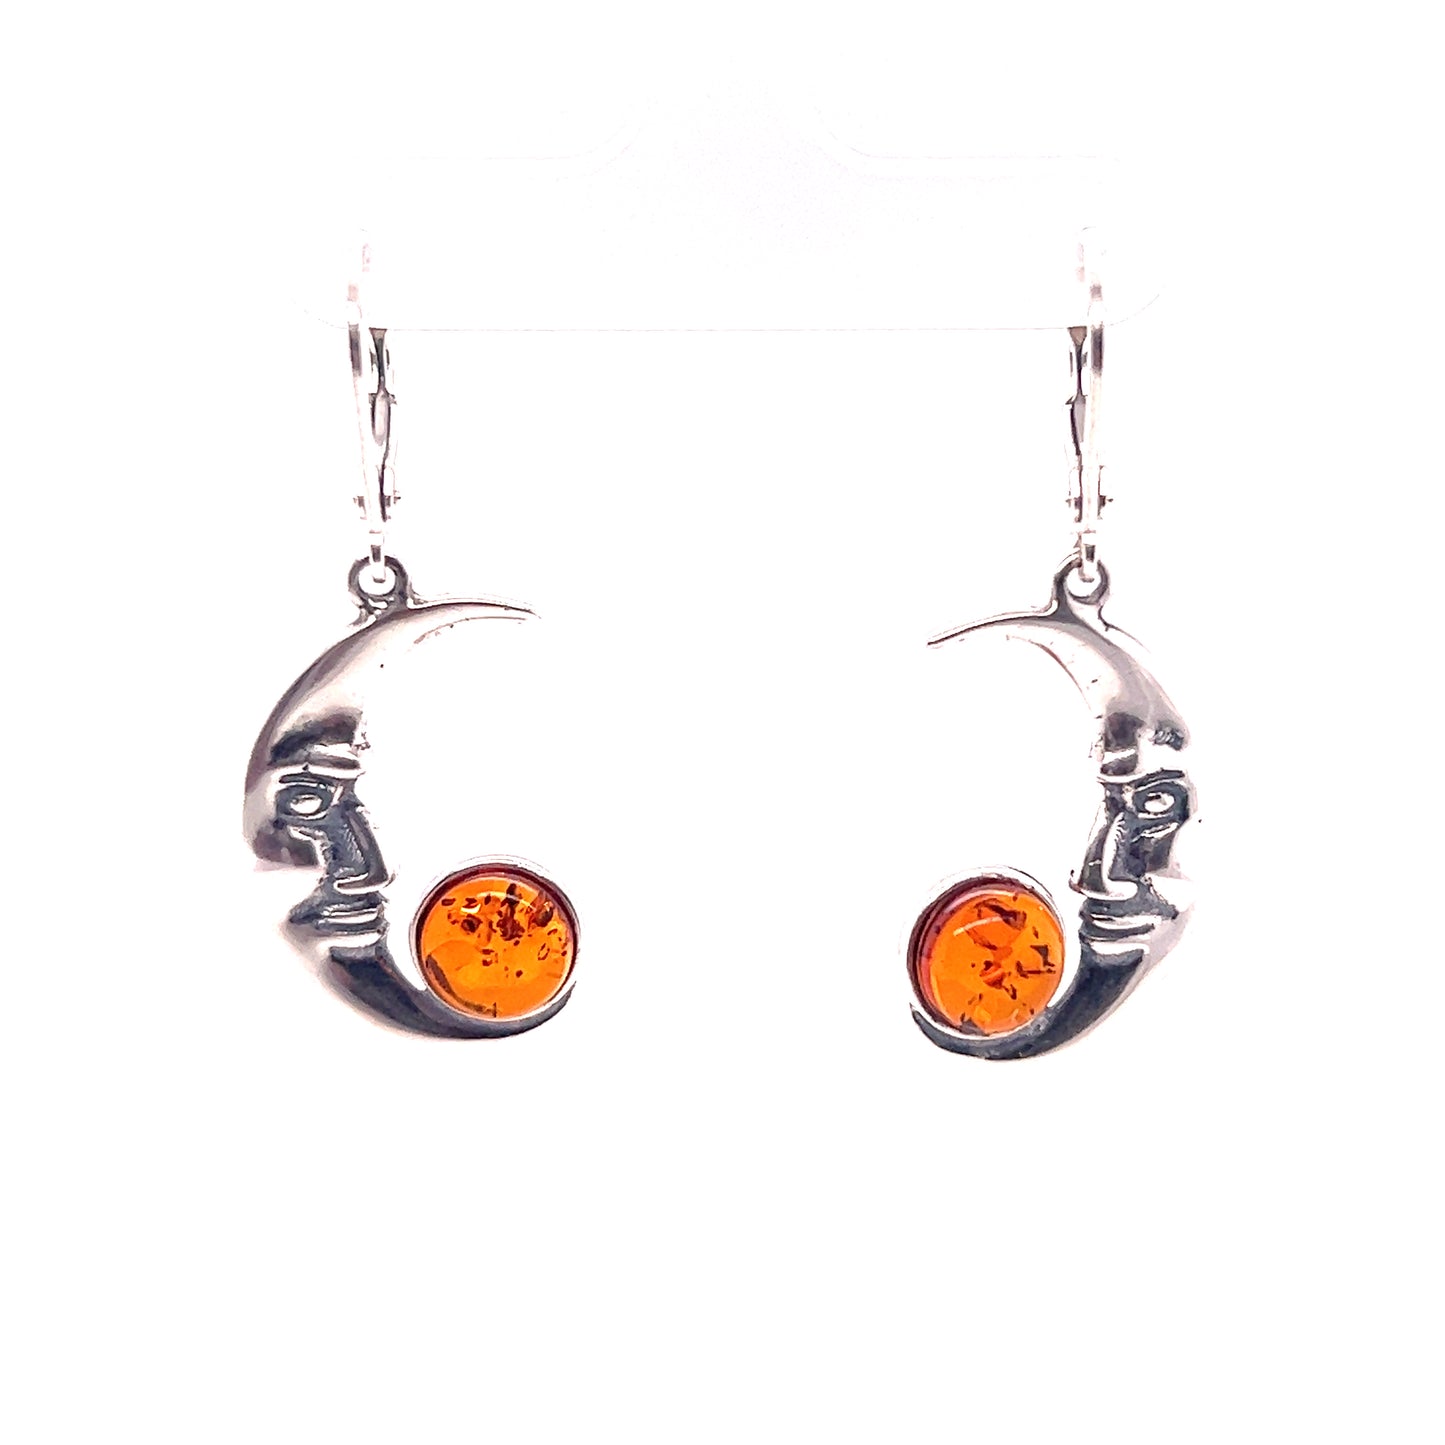 A pair of Super Silver Amber Man-in-the-Moon Earrings featuring a crescent moon design.